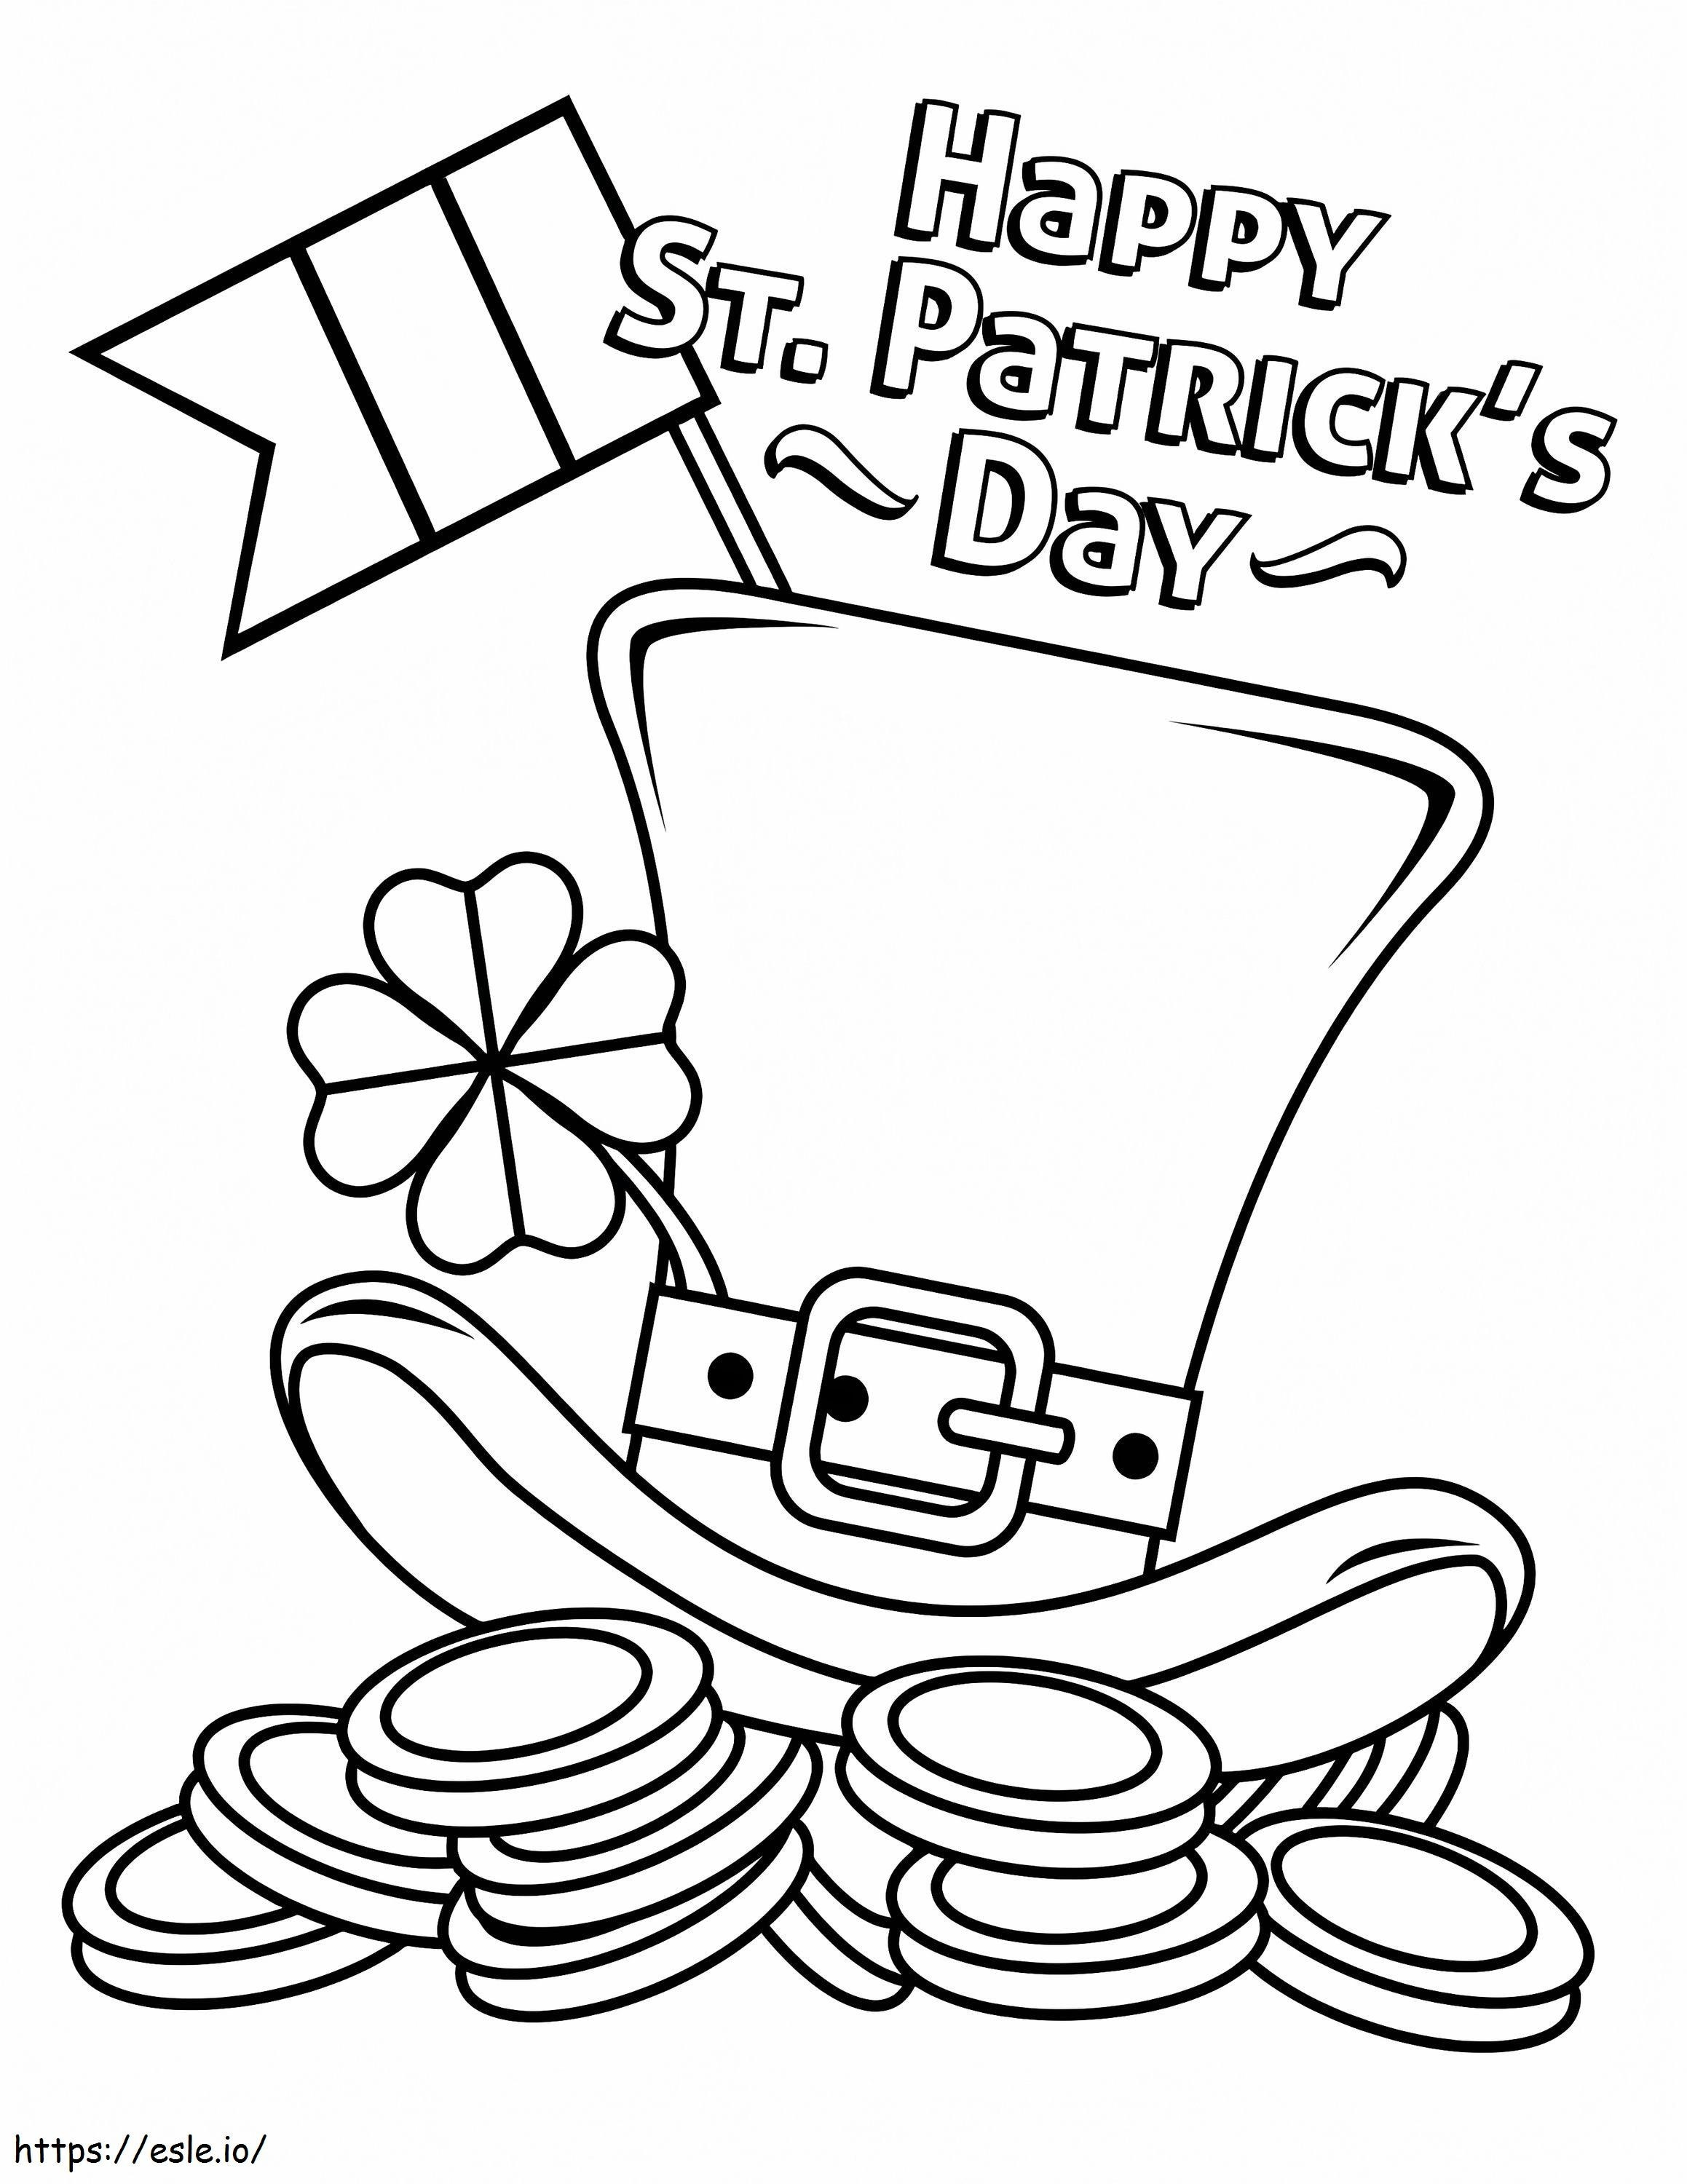 Happy St. Patricks Day 5 coloring page